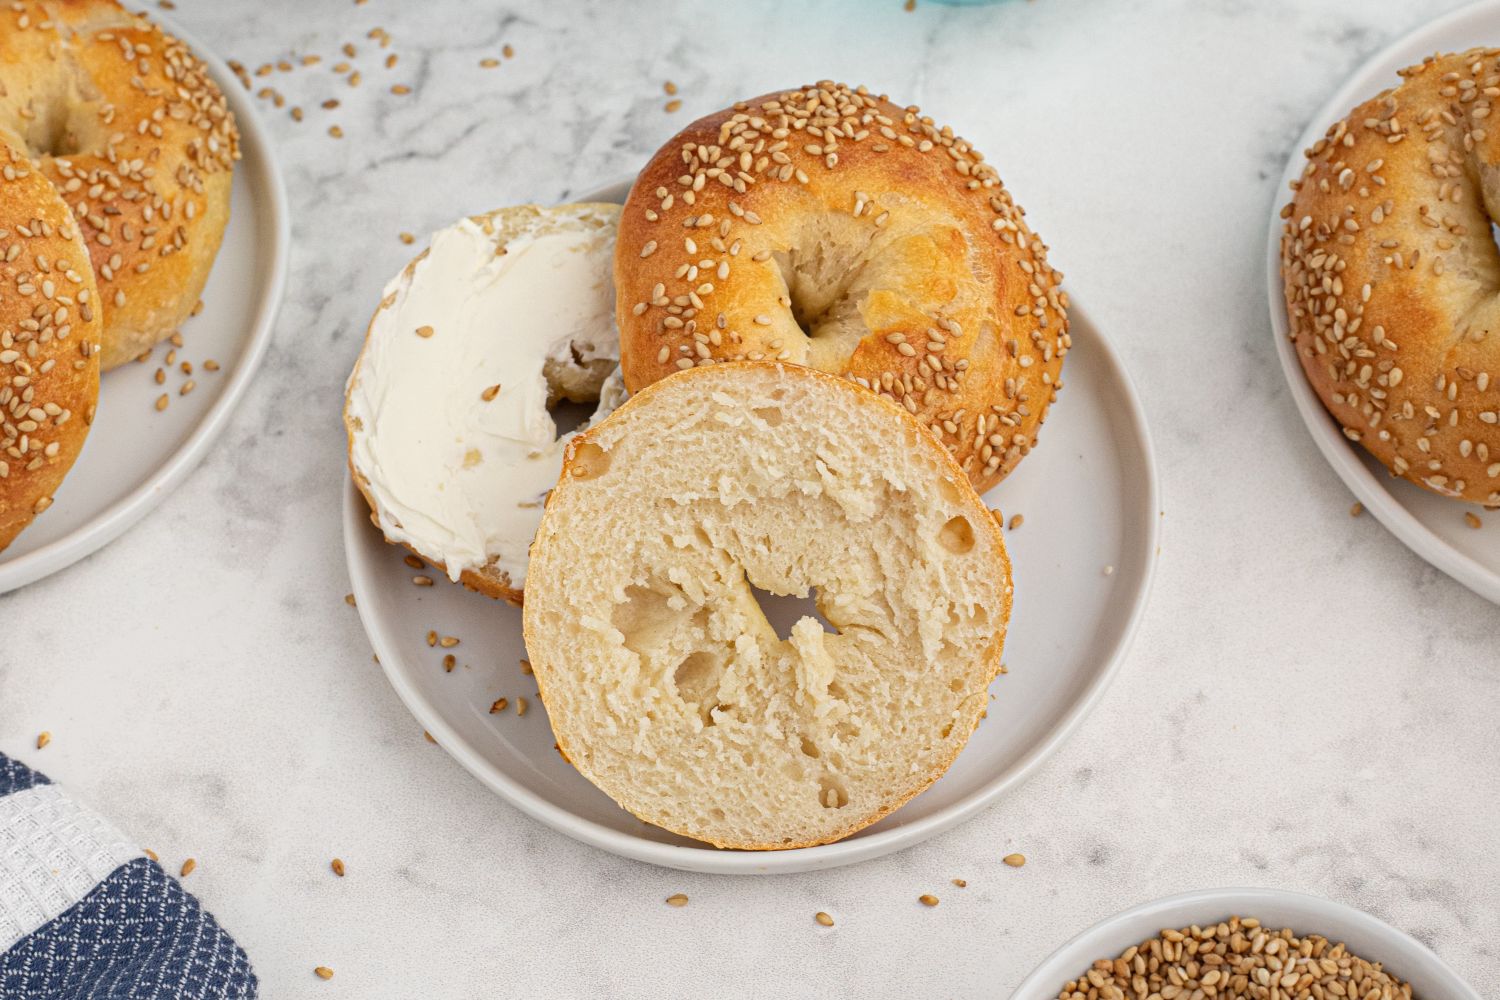 Two ingredient dough bagels with sesame seeds and served with cream cheese.